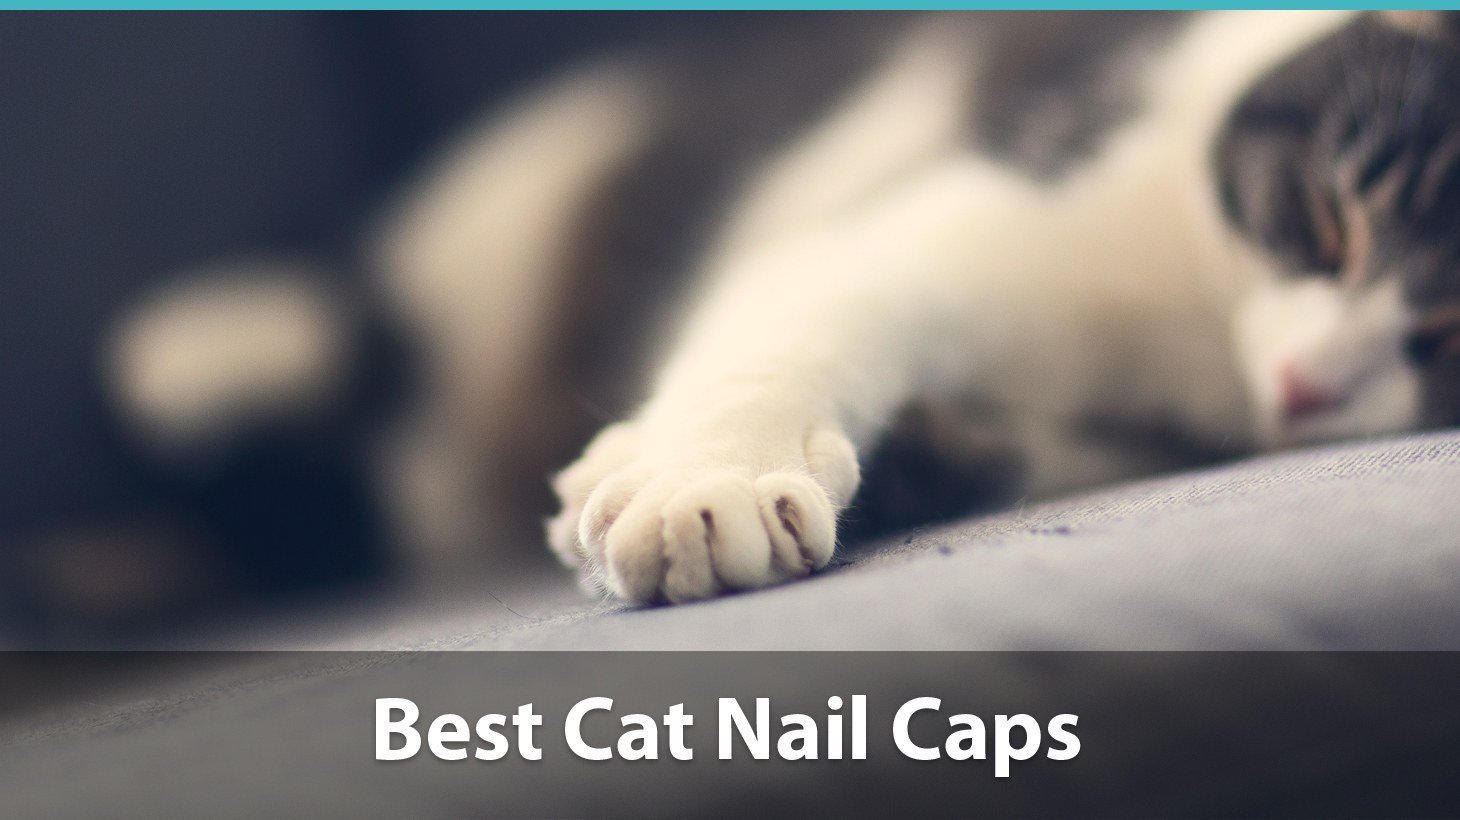 claw caps for cats